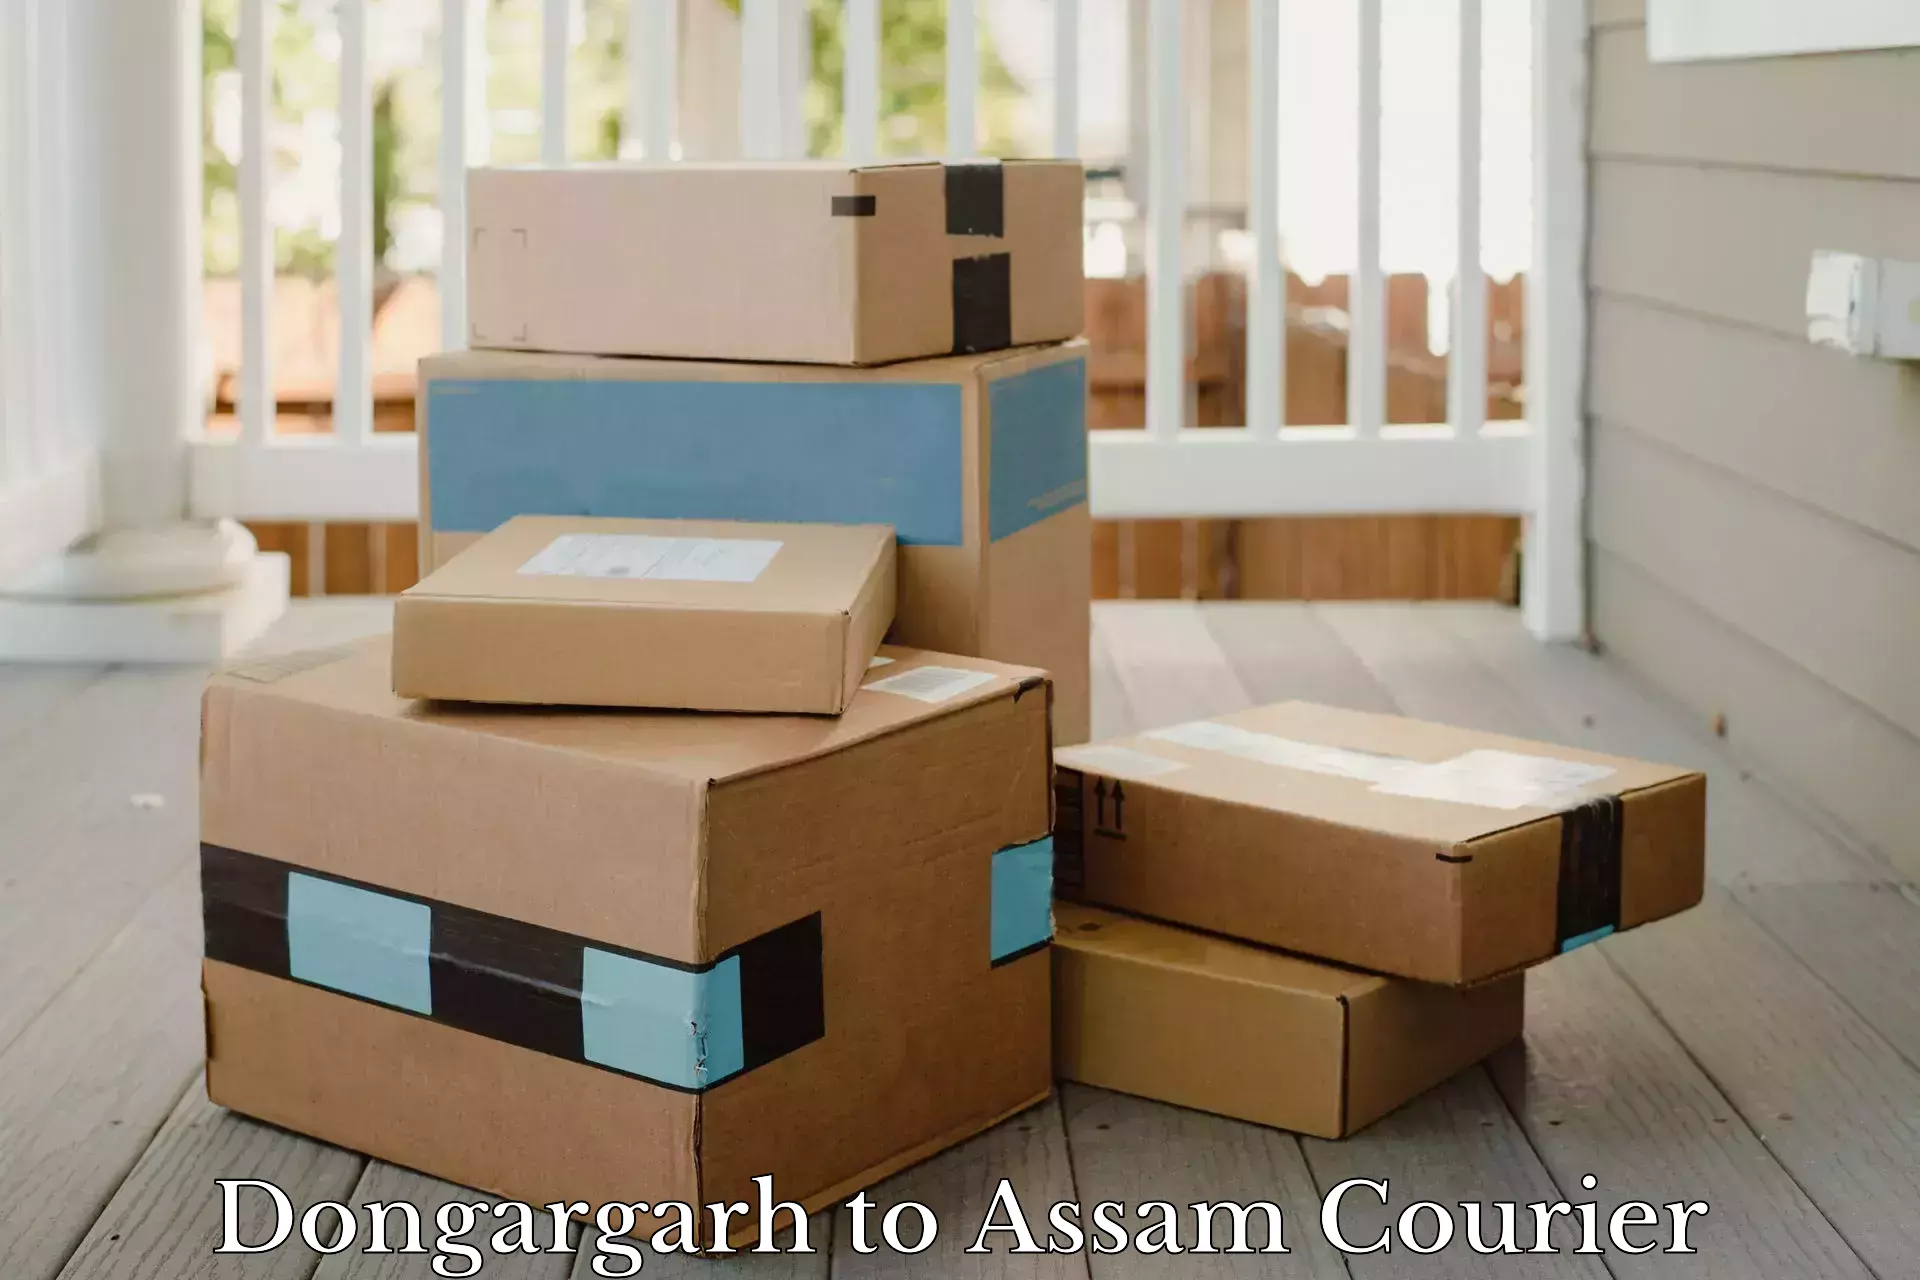 Rapid shipping services Dongargarh to Pathsala